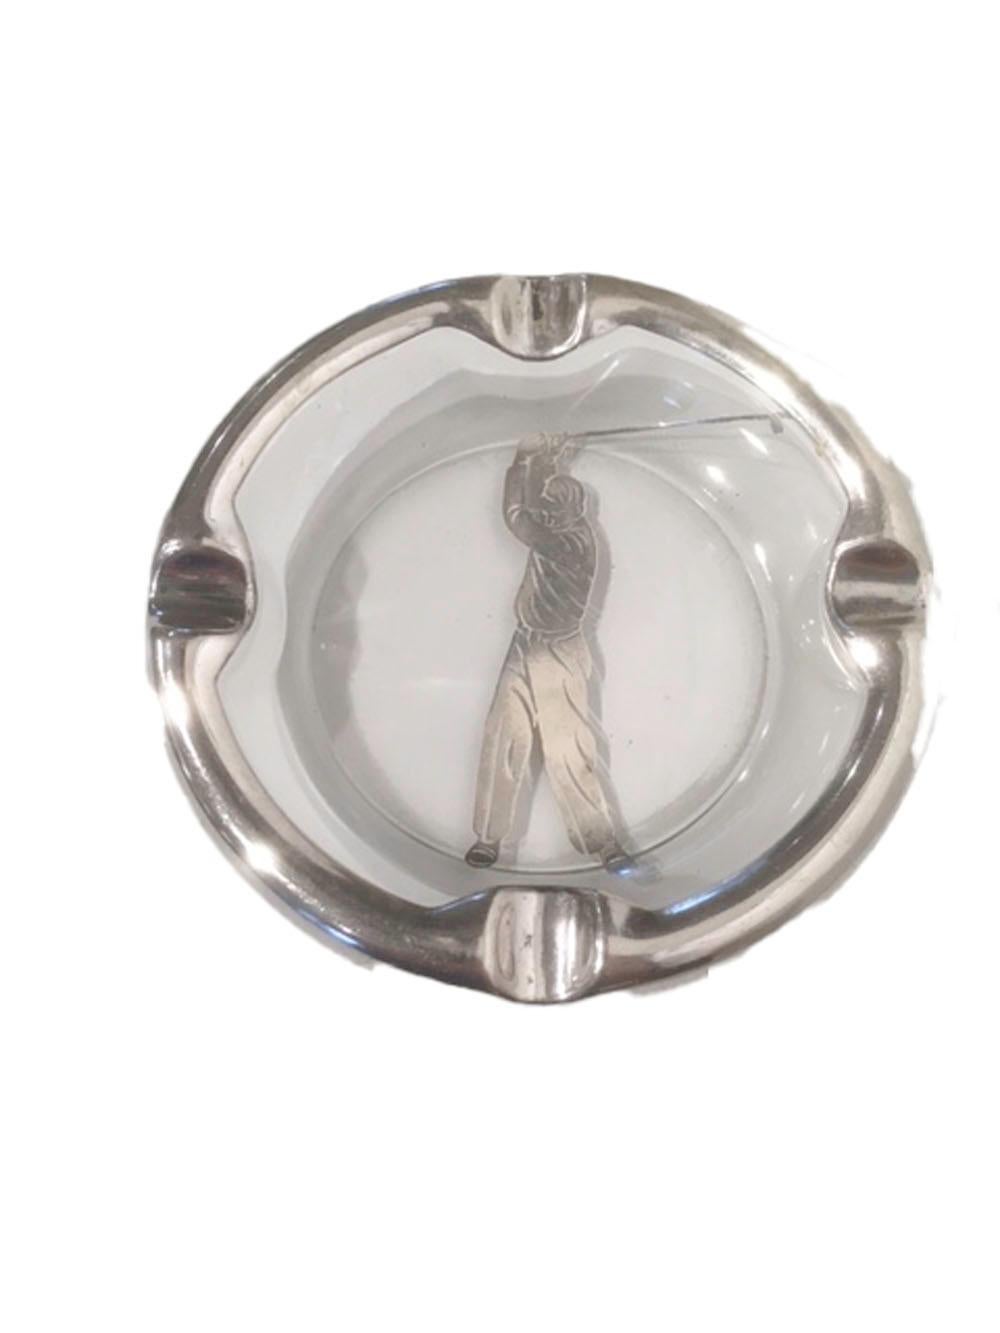 American Art Deco Glass Ashtray with Sterling Overlay of a Golfer Swinging a Club